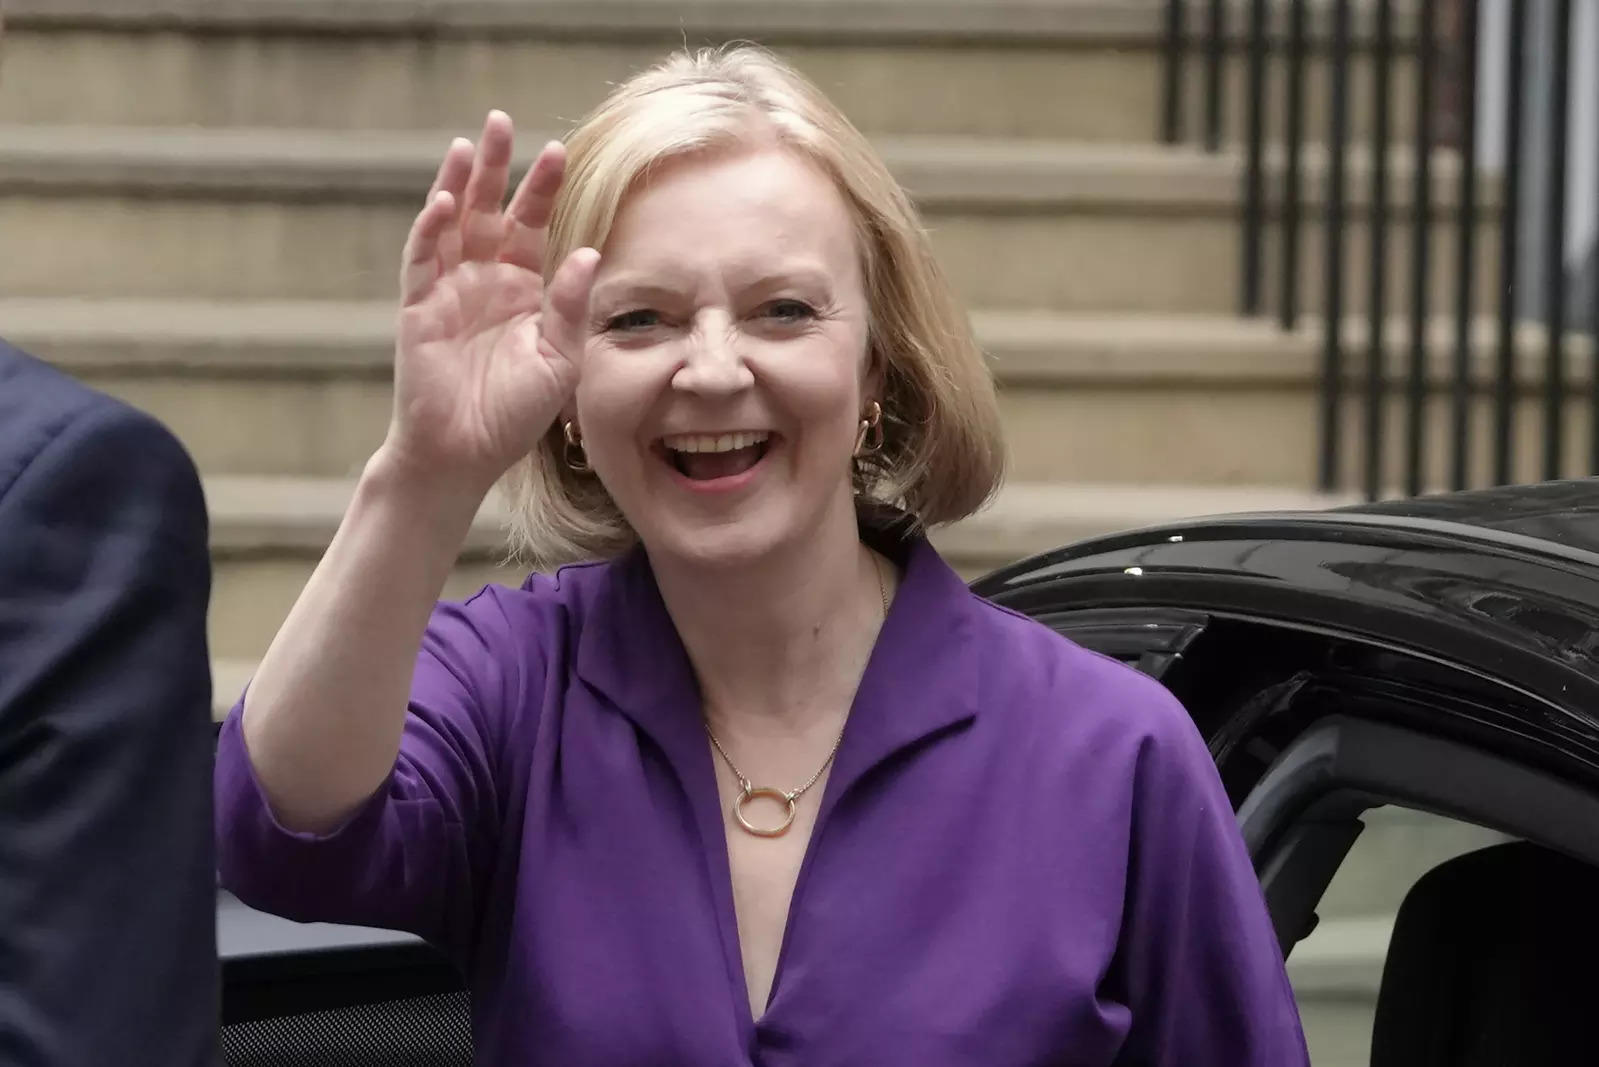 Liz Truss' pictures break the internet as she becomes Britain's next prime minister